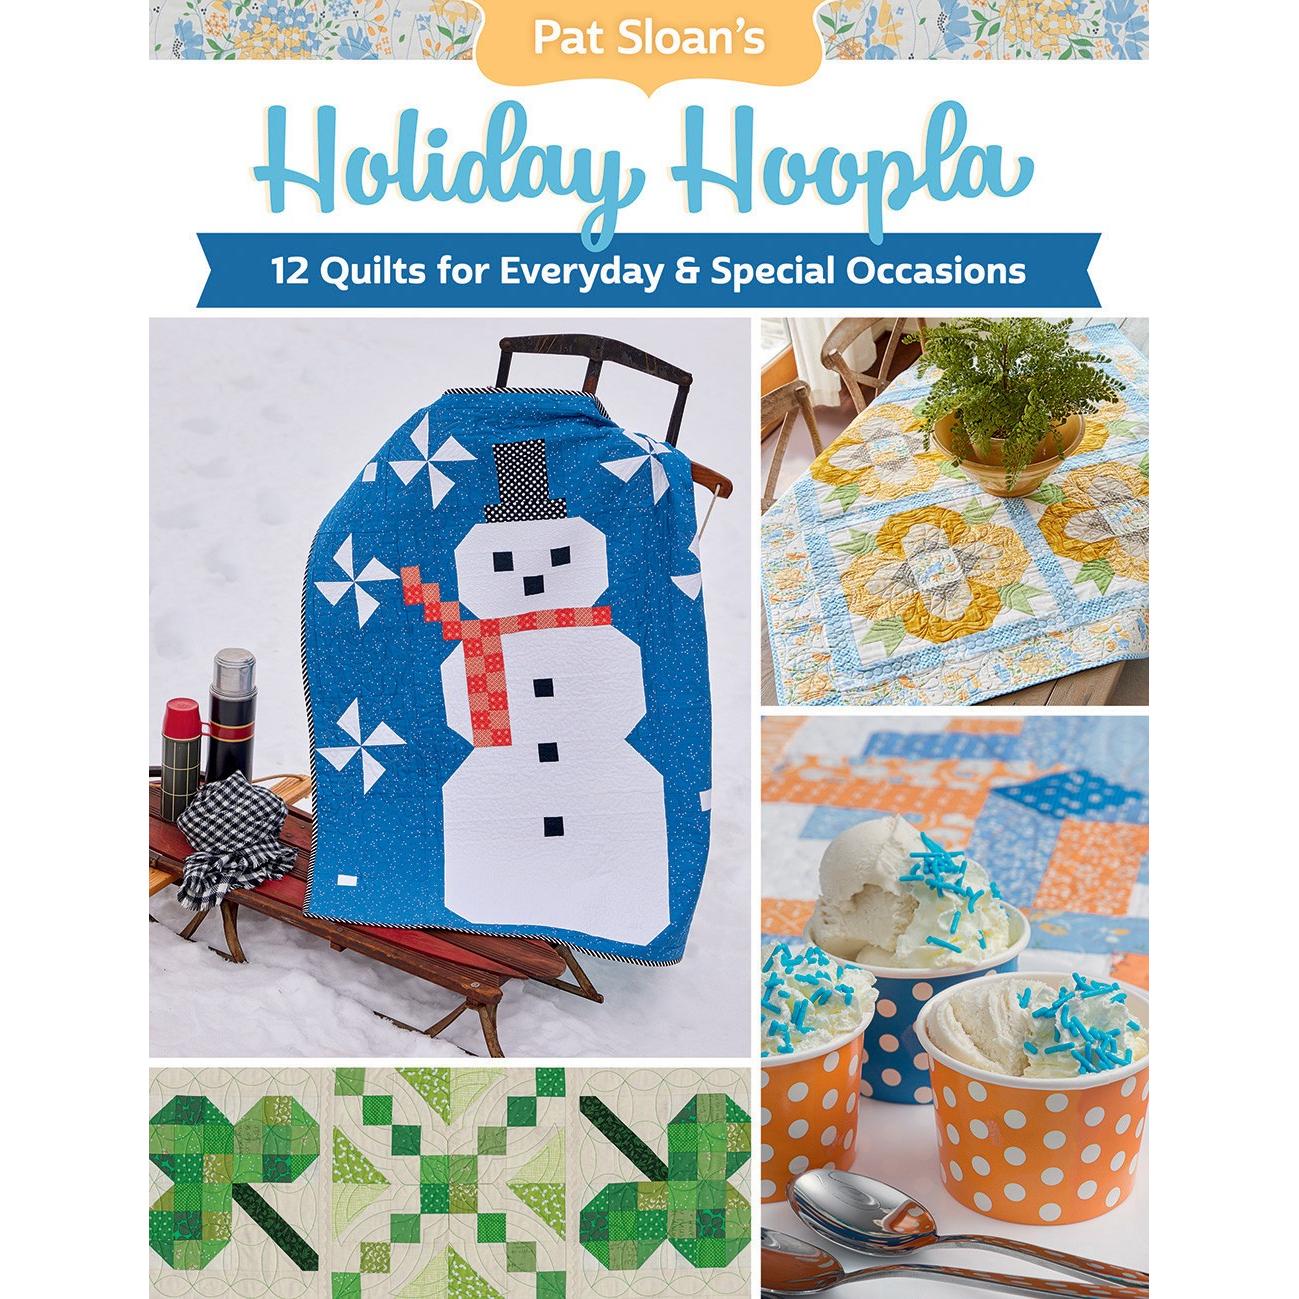 Pat Sloans Holiday Hoopla Book-Martingale-My Favorite Quilt Store